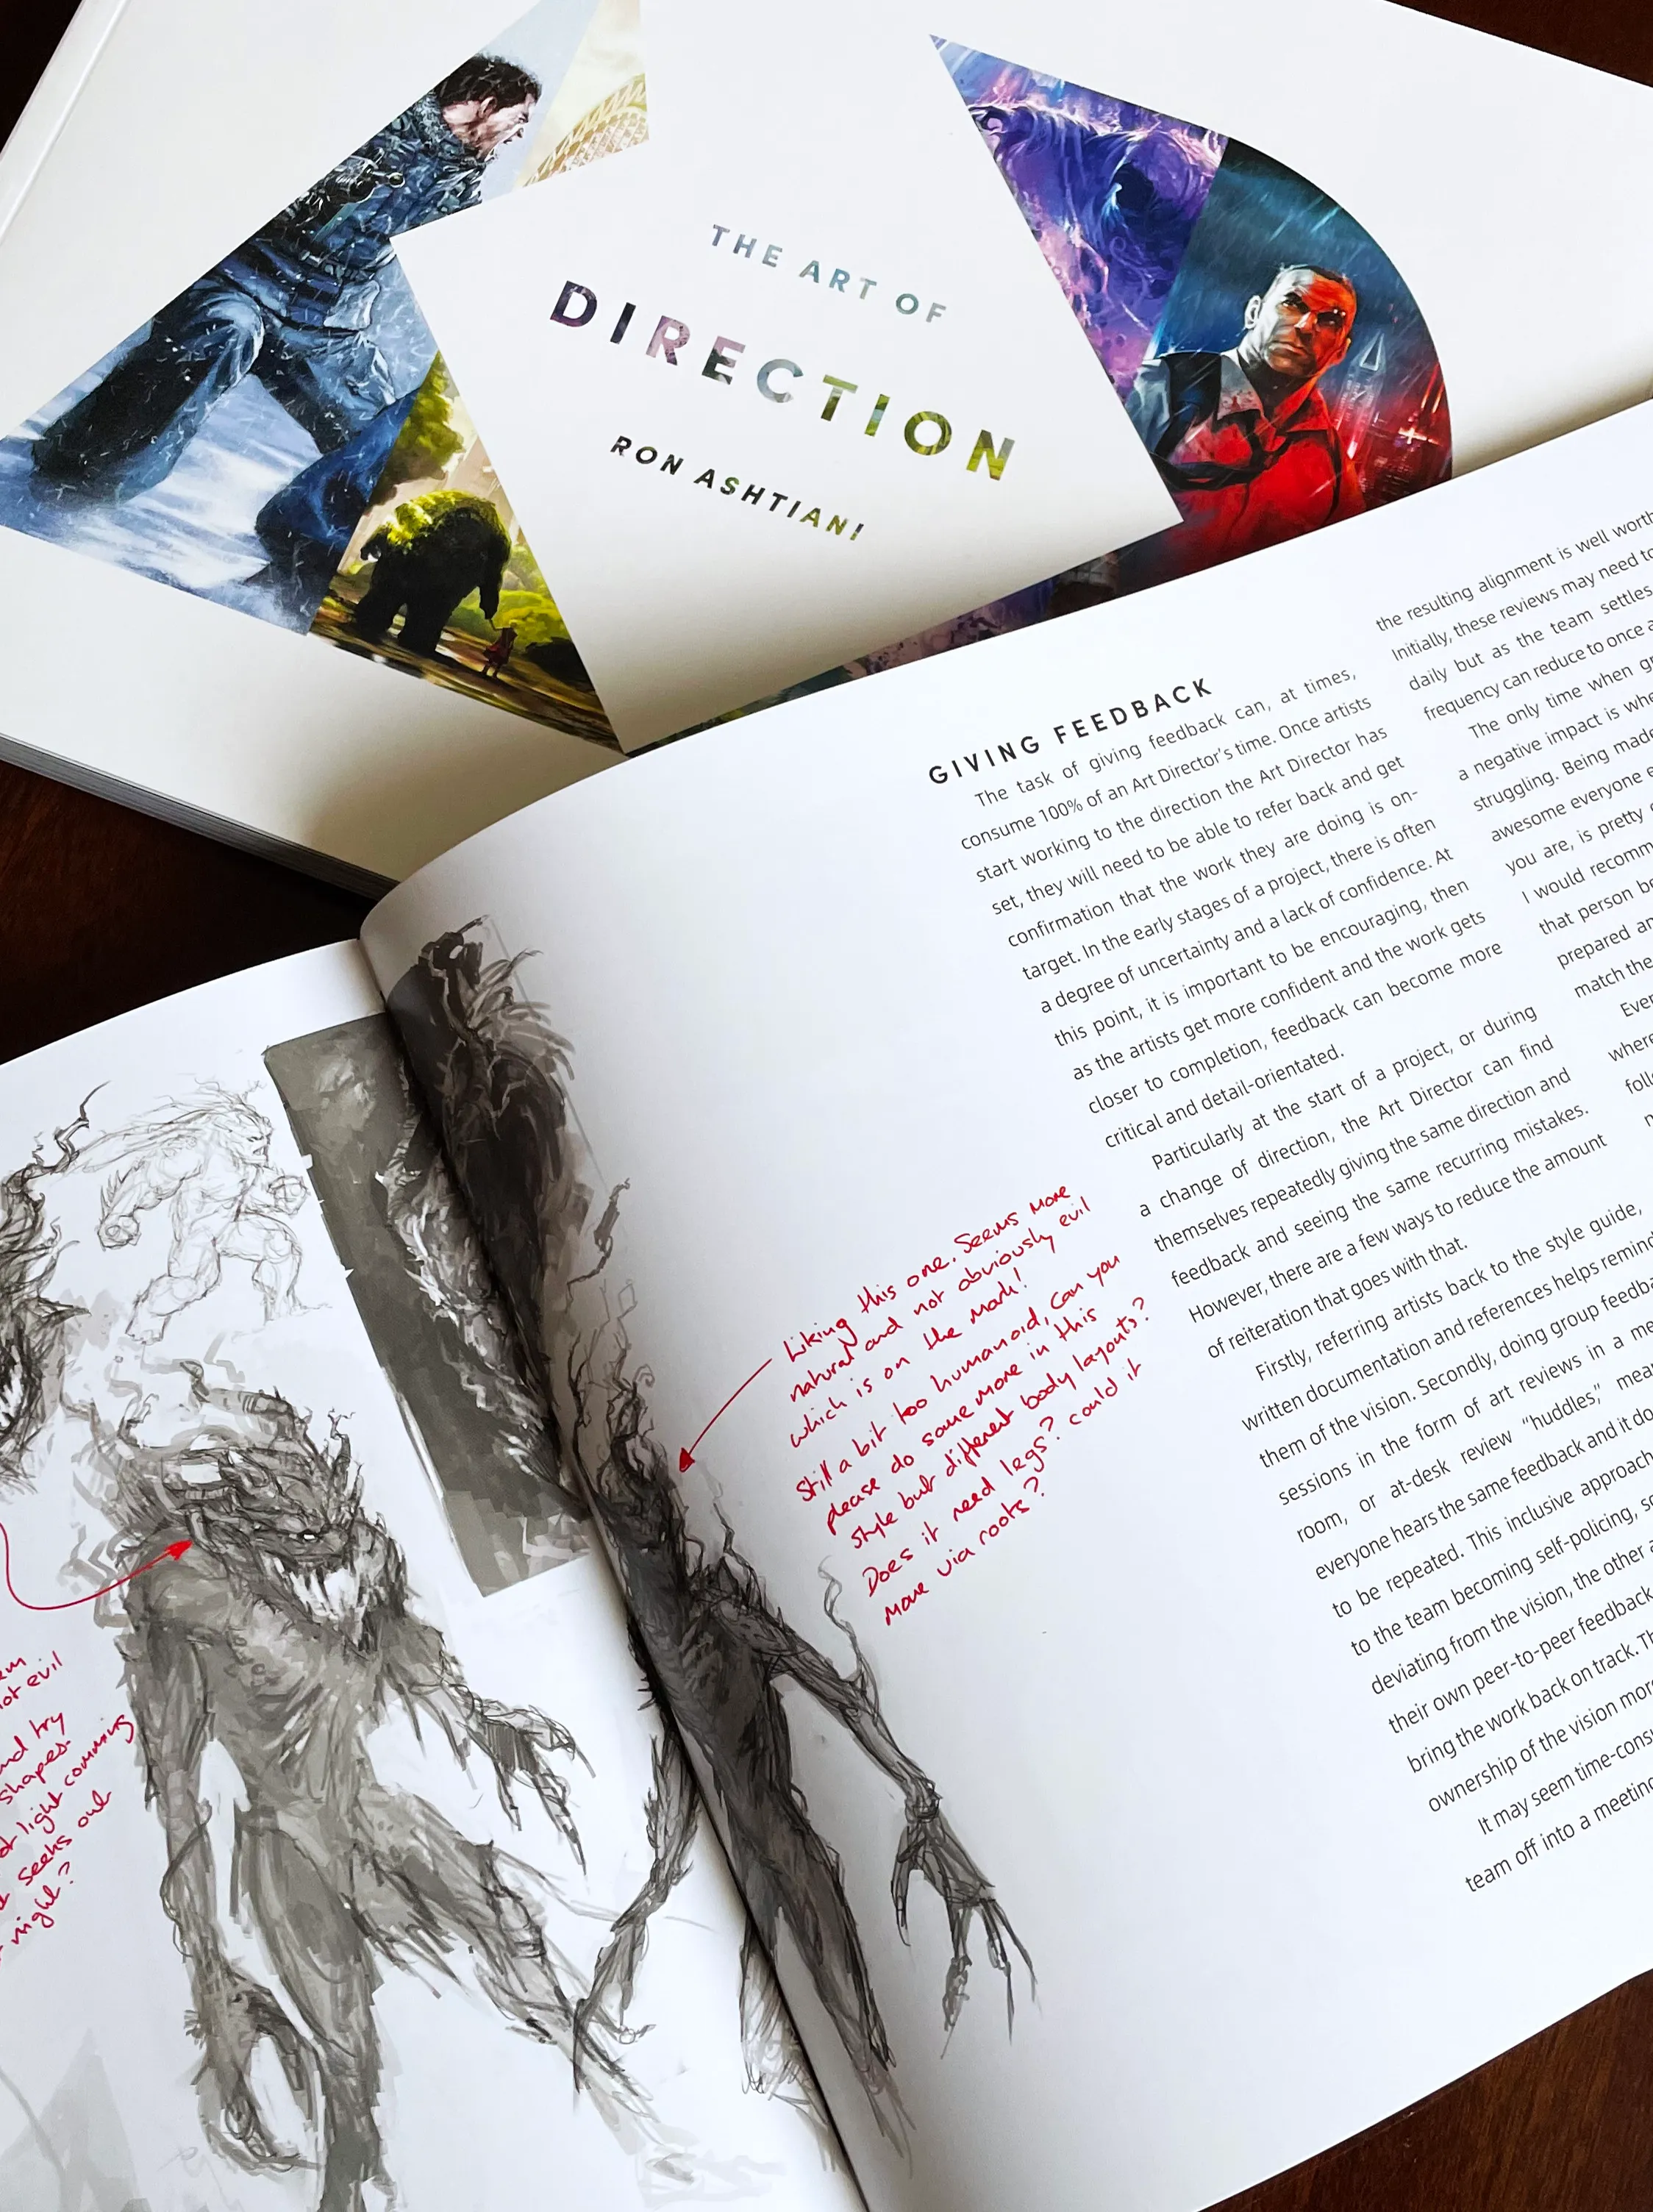 An open copy of The Art of Direction sits on top of a closed book.